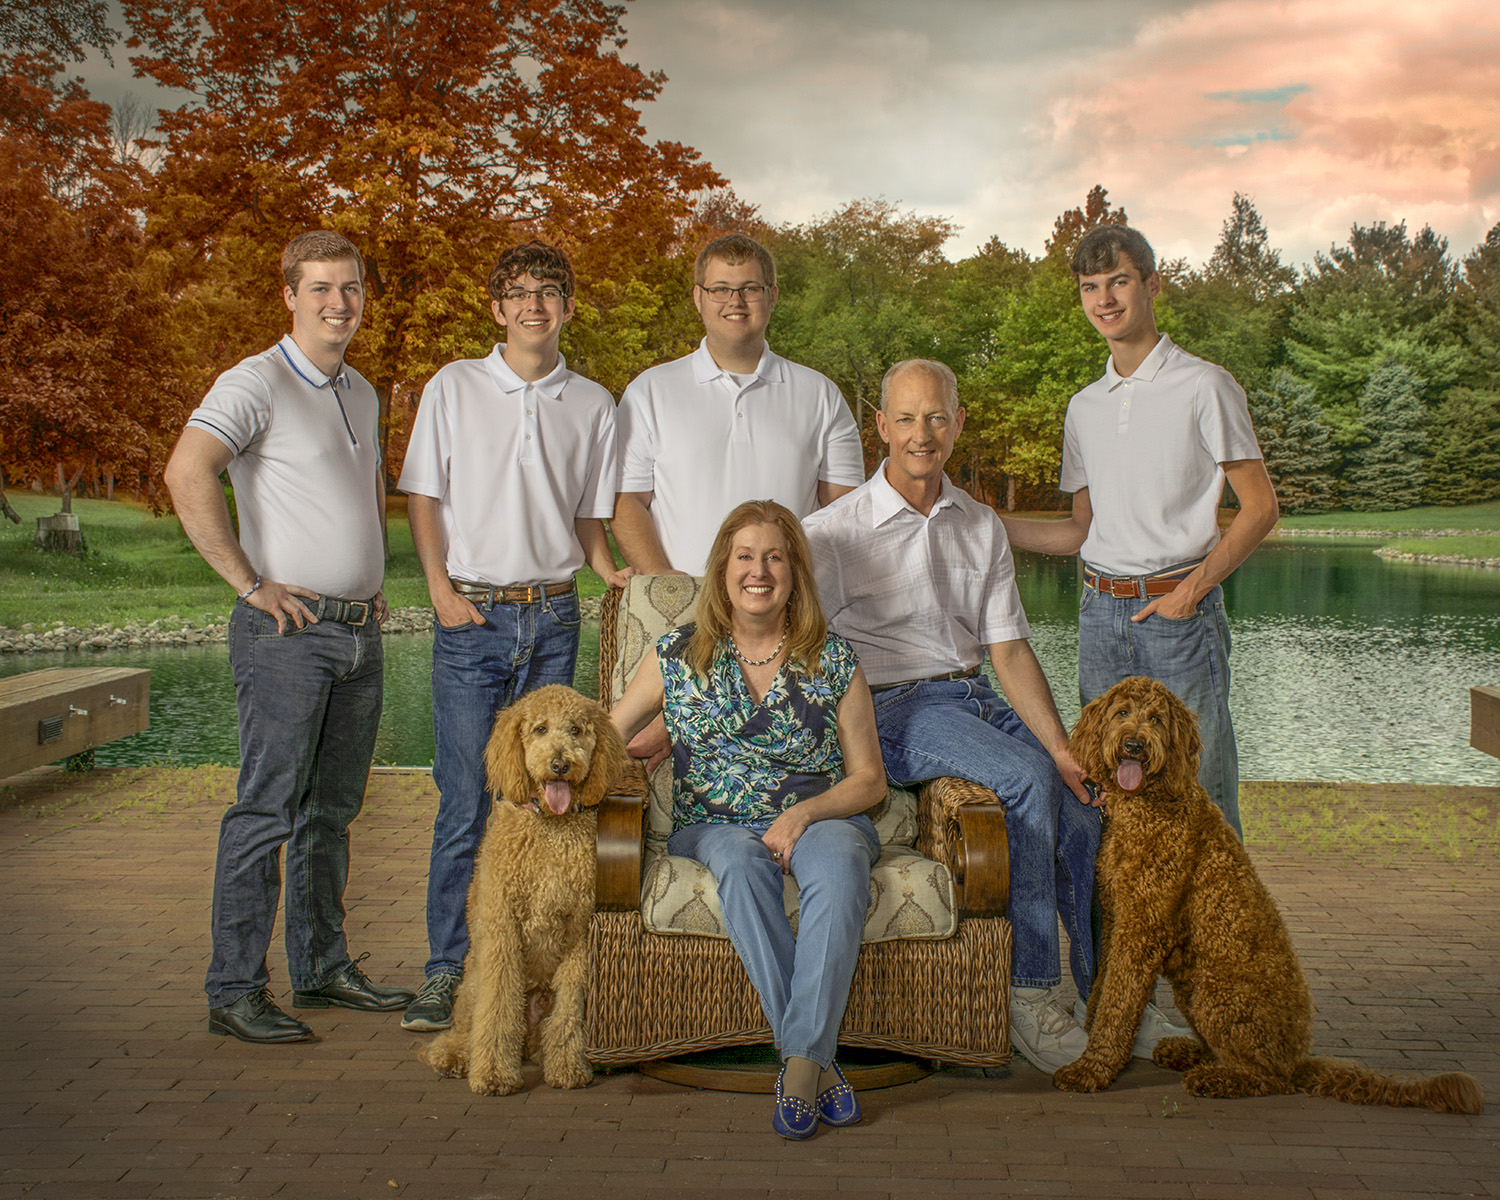 family portrait at their house in Centerville Ohio by Dan Cleary of Cleary Creative Photography